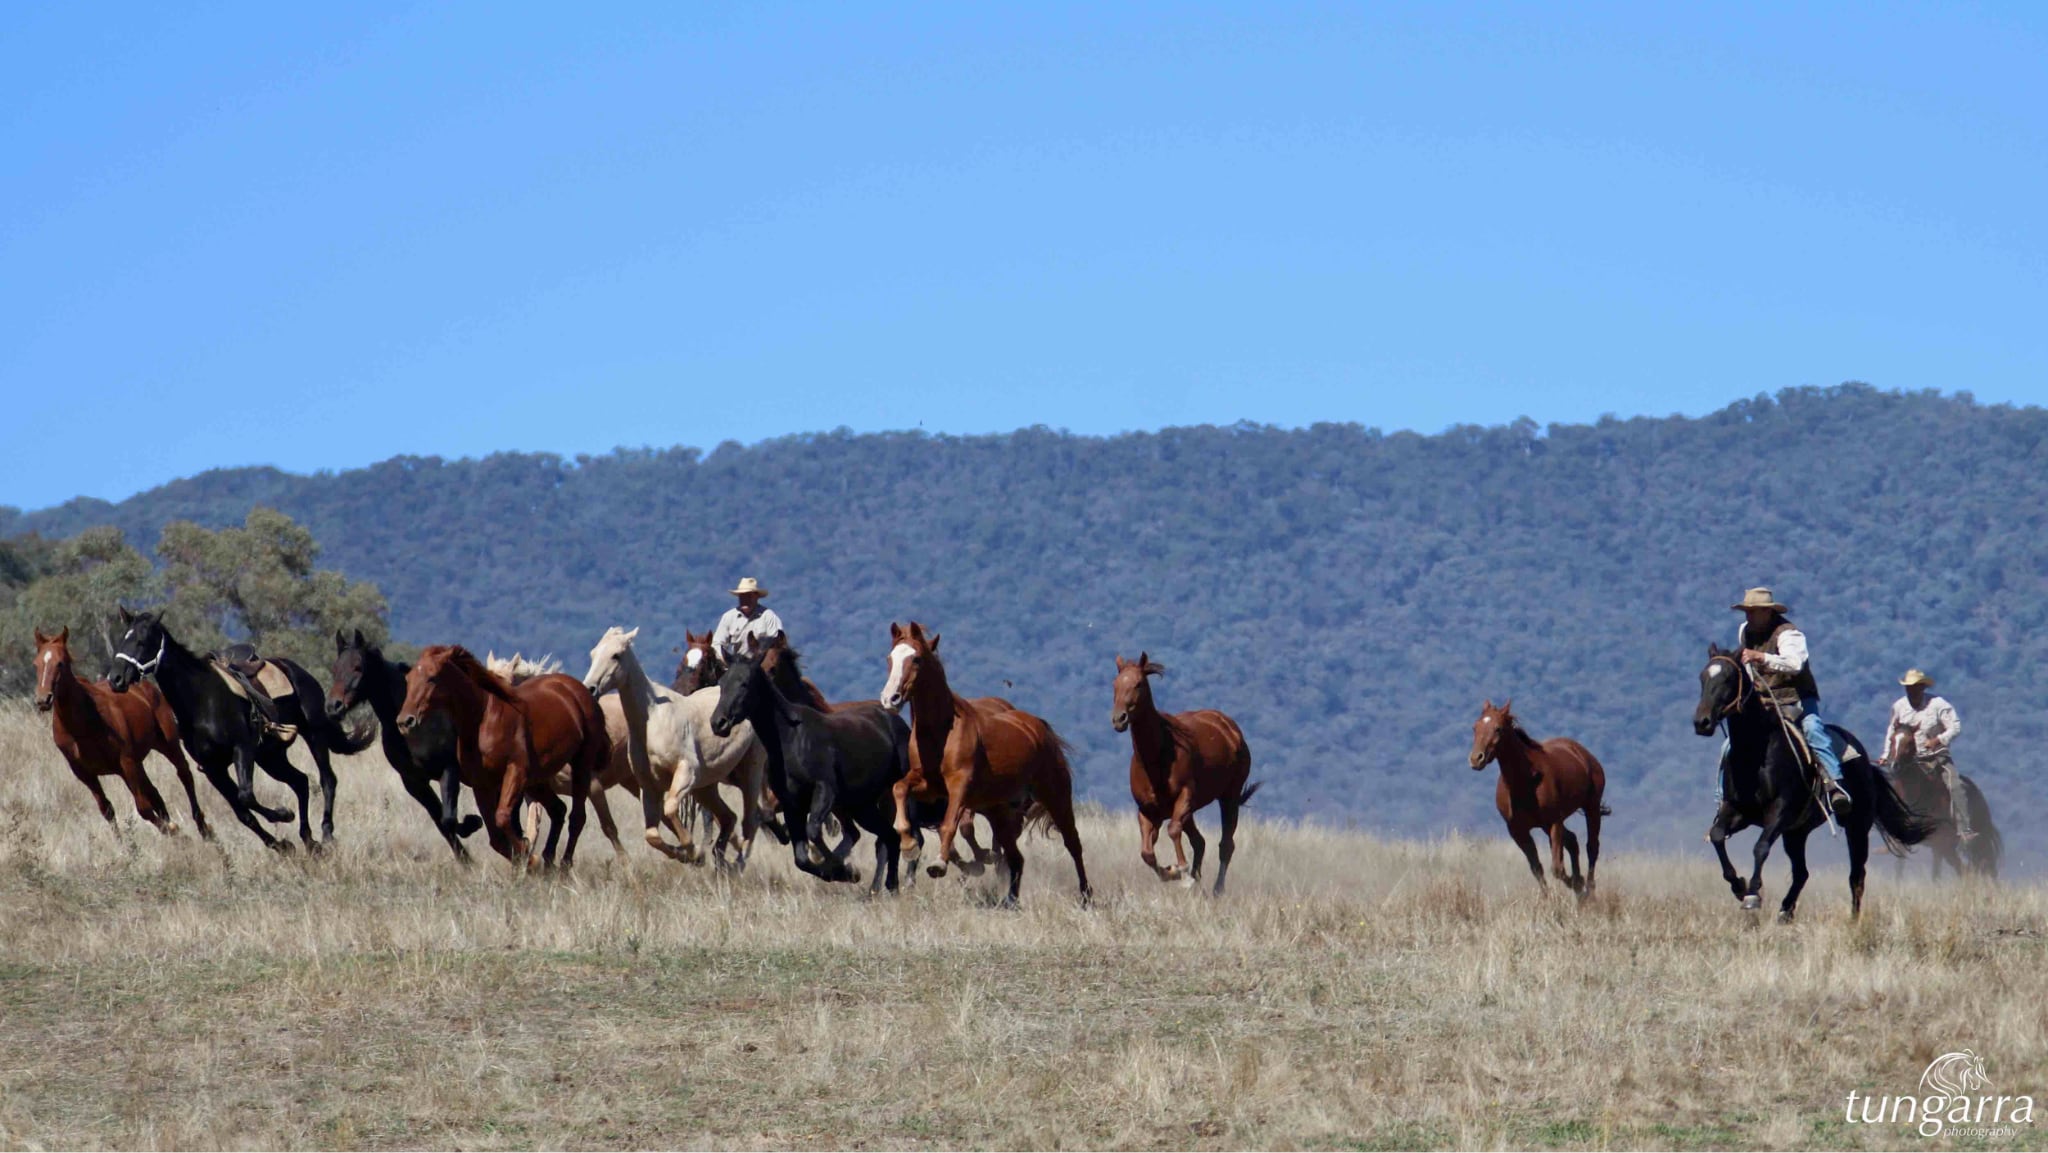 Man from Snowy River - Wild Horses Tungarra photography